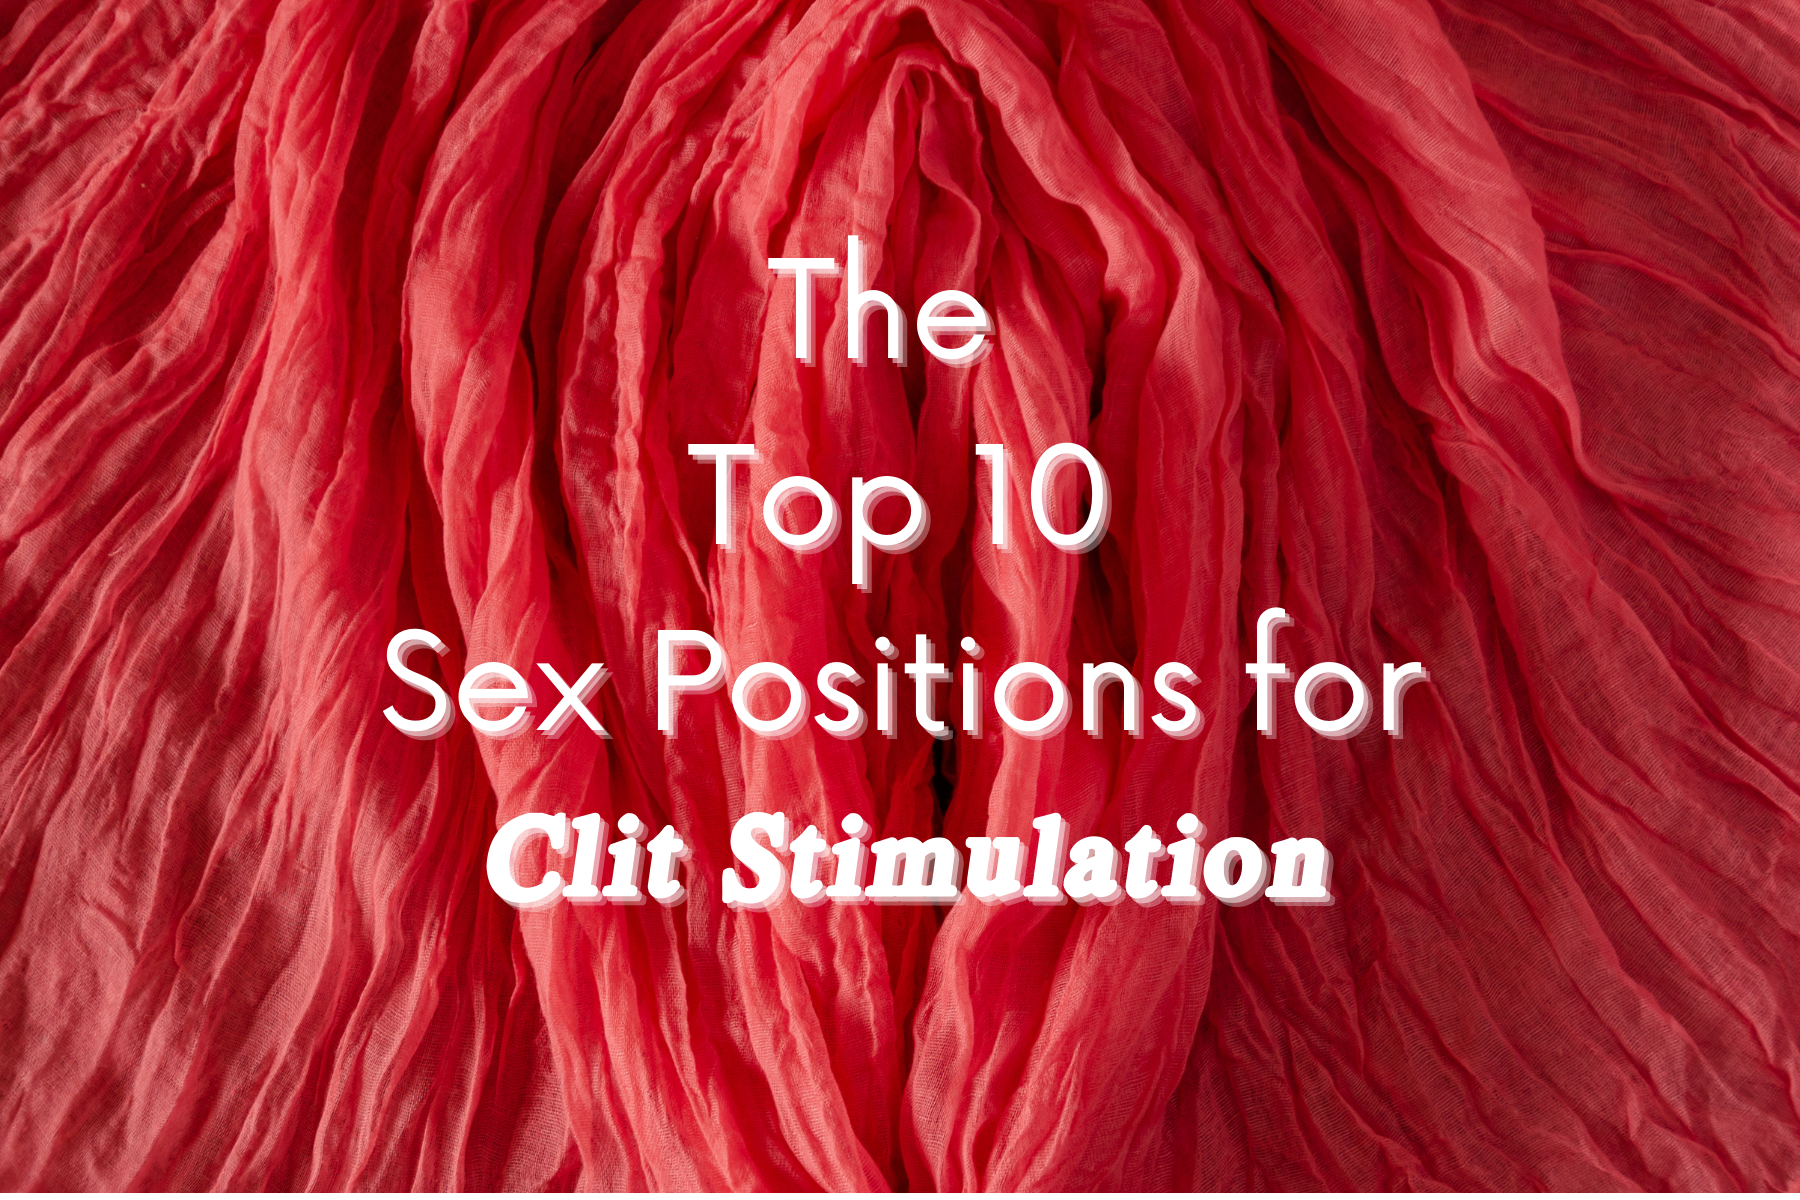 top positions for clitoral stimulation